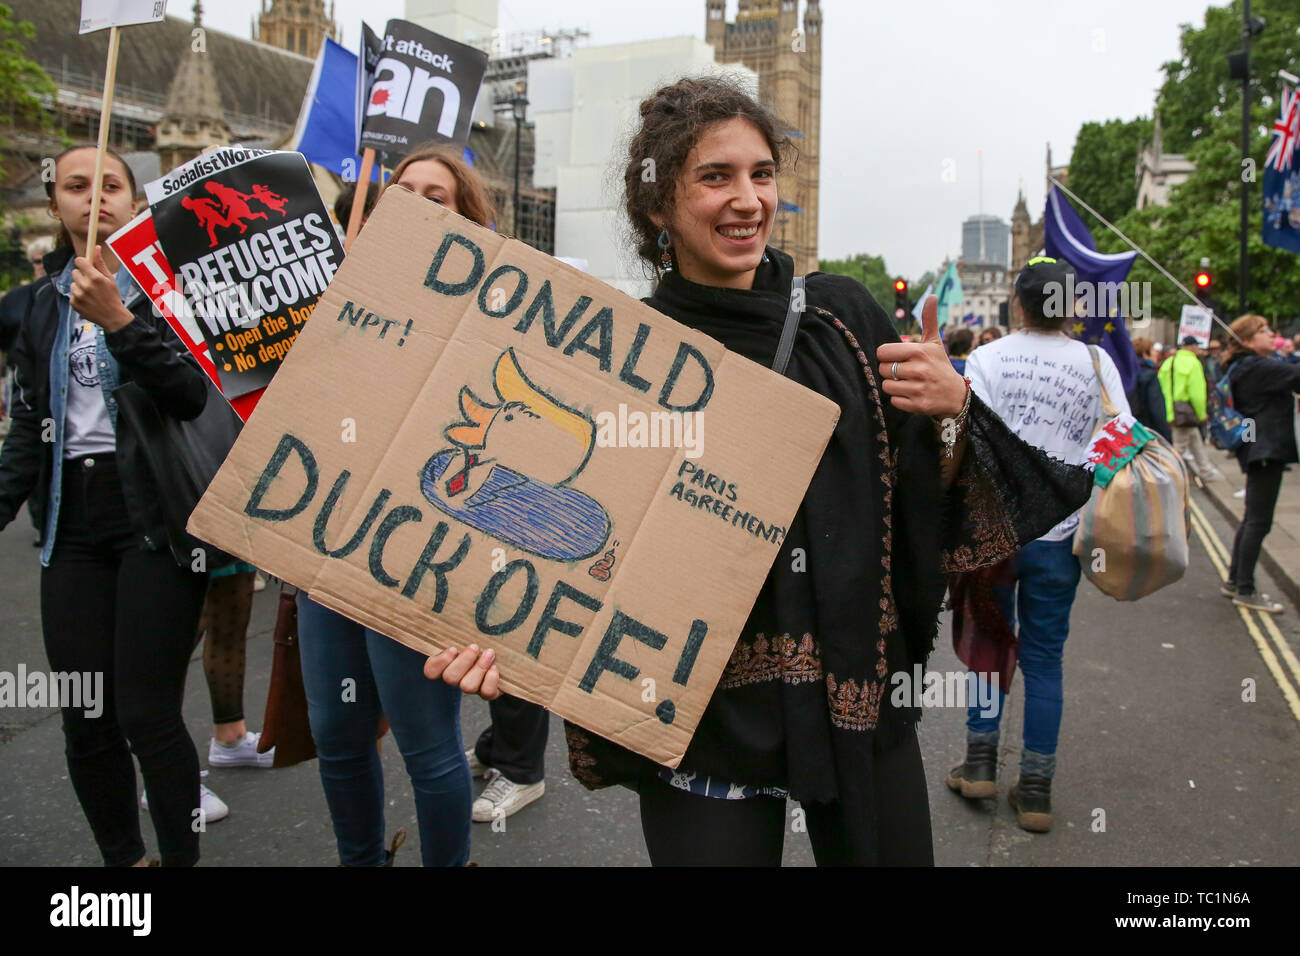 Protesters hold placards during the anti-Trump rally at the Parliament Square as the US President Donald Trump and First Lady Melania Trump meet the British Prime Minister Theresa May and her husband, Philip May in No10 Downing Street on the second day of the State Visit to the UK. Stock Photo